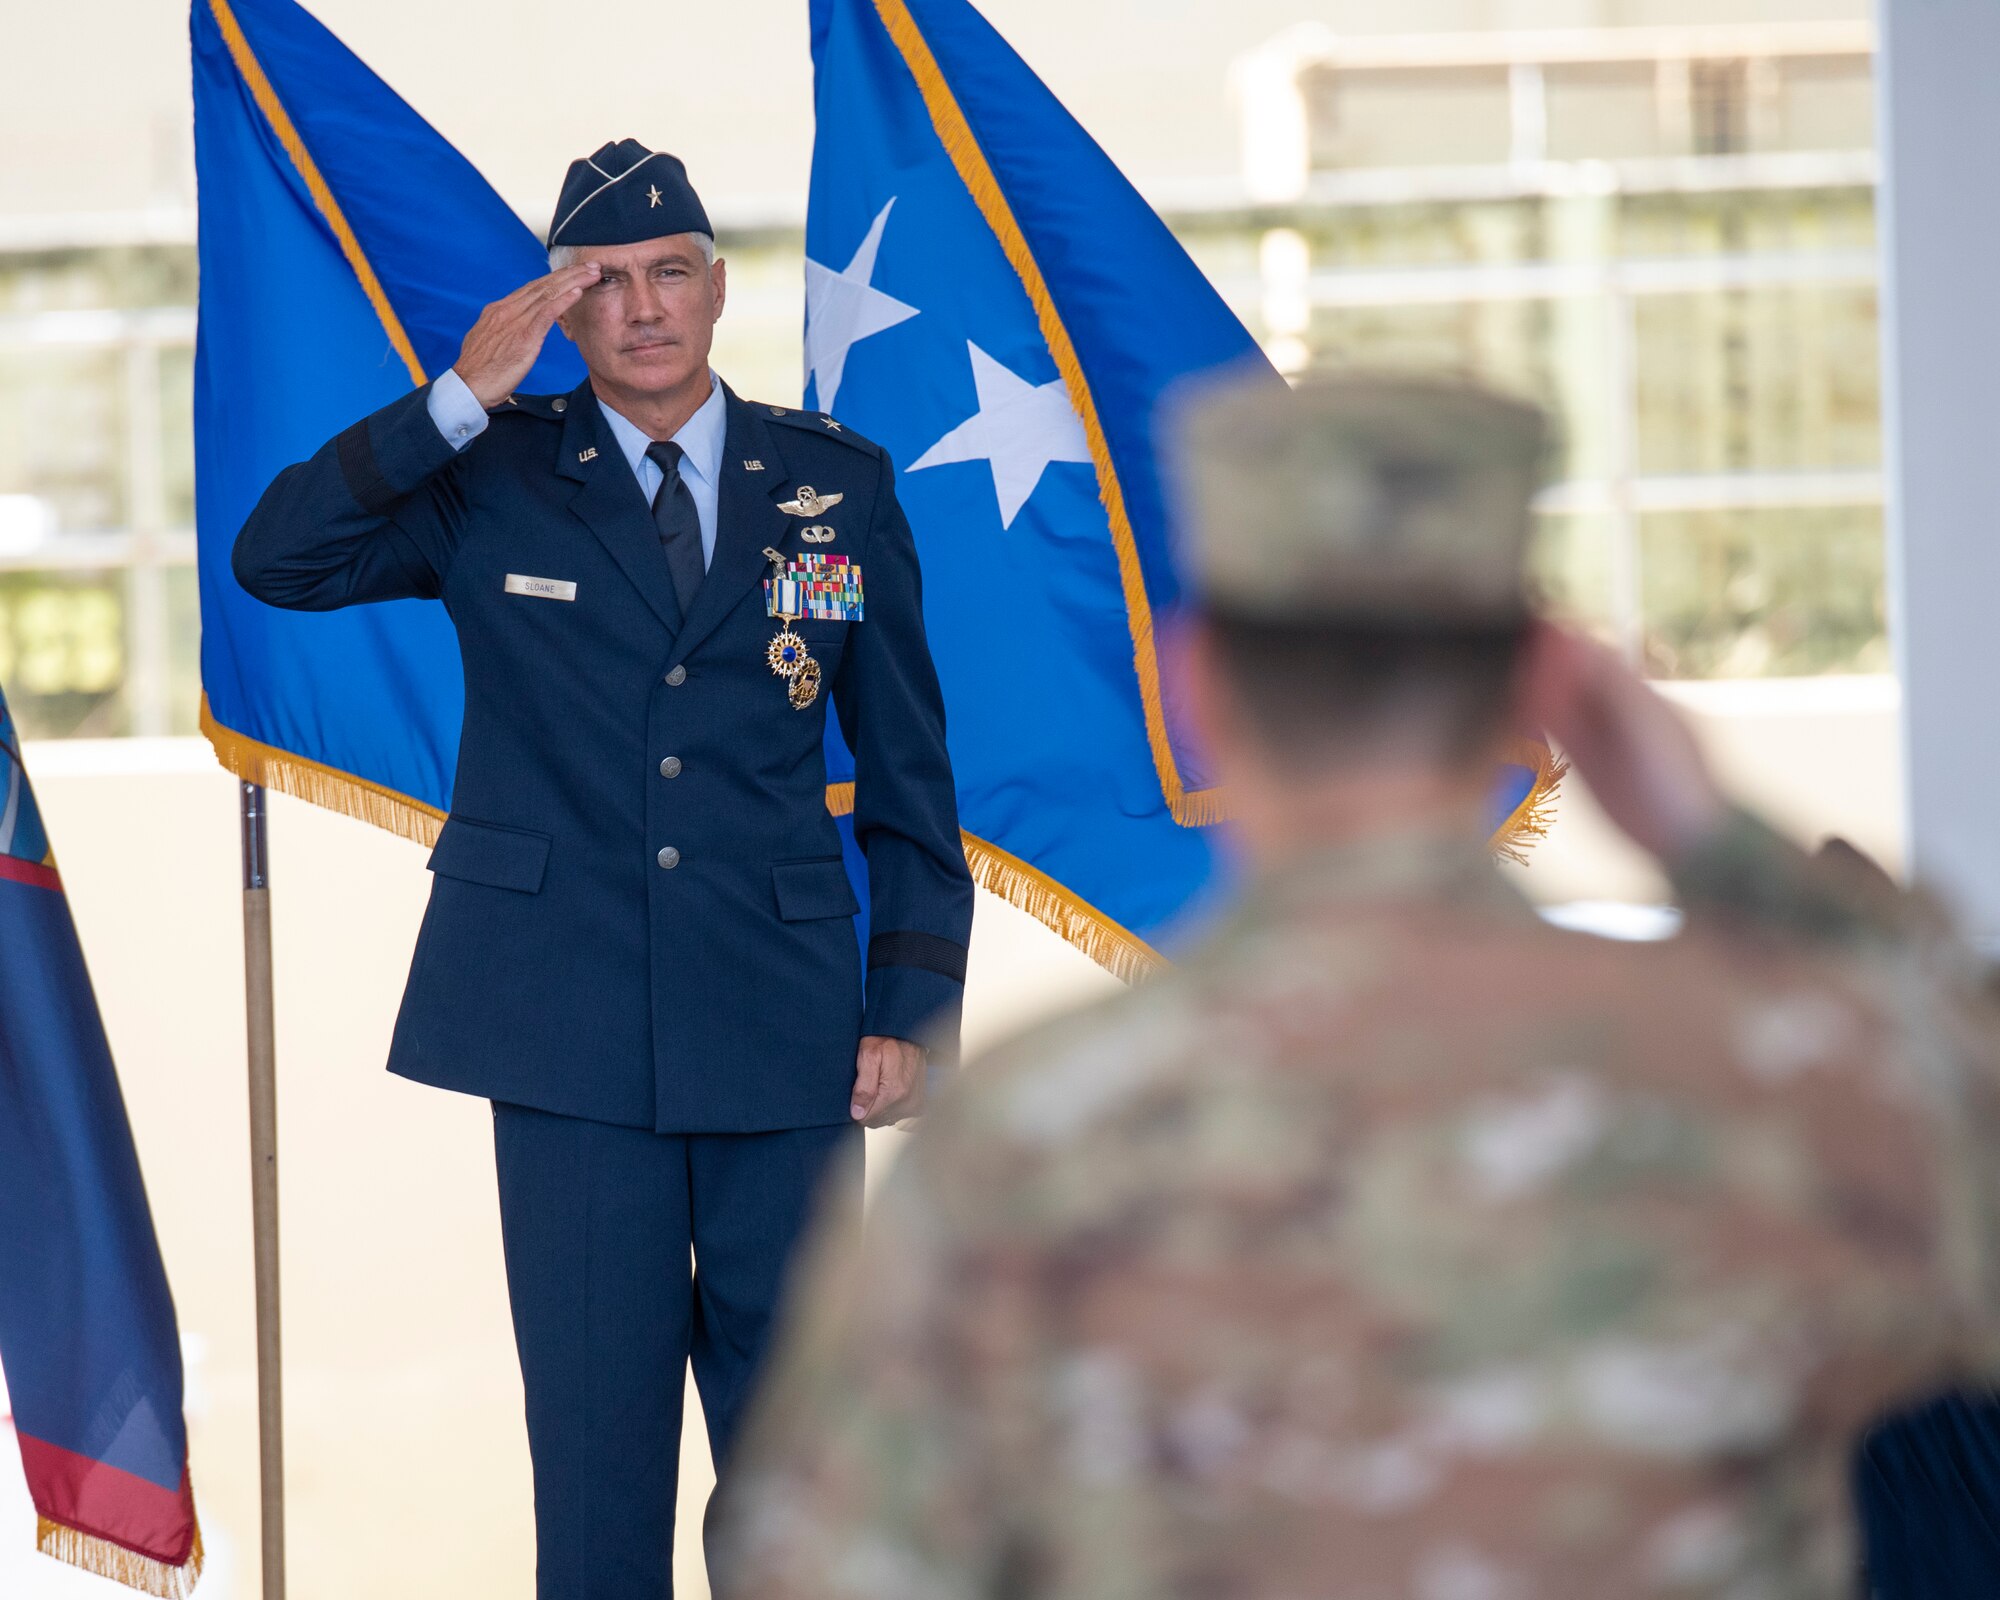 U.S. Air Force Brig. Gen. Jeremy T. Sloane renders his final salute during the 36th Wing change of command ceremony, June 10, 2022, at Andersen Air Force Base, Guam. As installation commander, Birch is now responsible for the well-being of more than 8,000 joint military and civilian personnel on Andersen AFB. Additionally, he supports Department of Defense installation management of Guam and the Northern Mariana Islands as the Deputy Commander of Joint Region Marianas. (U.S. Air Force photo by Staff Sgt. Ryan Brooks)